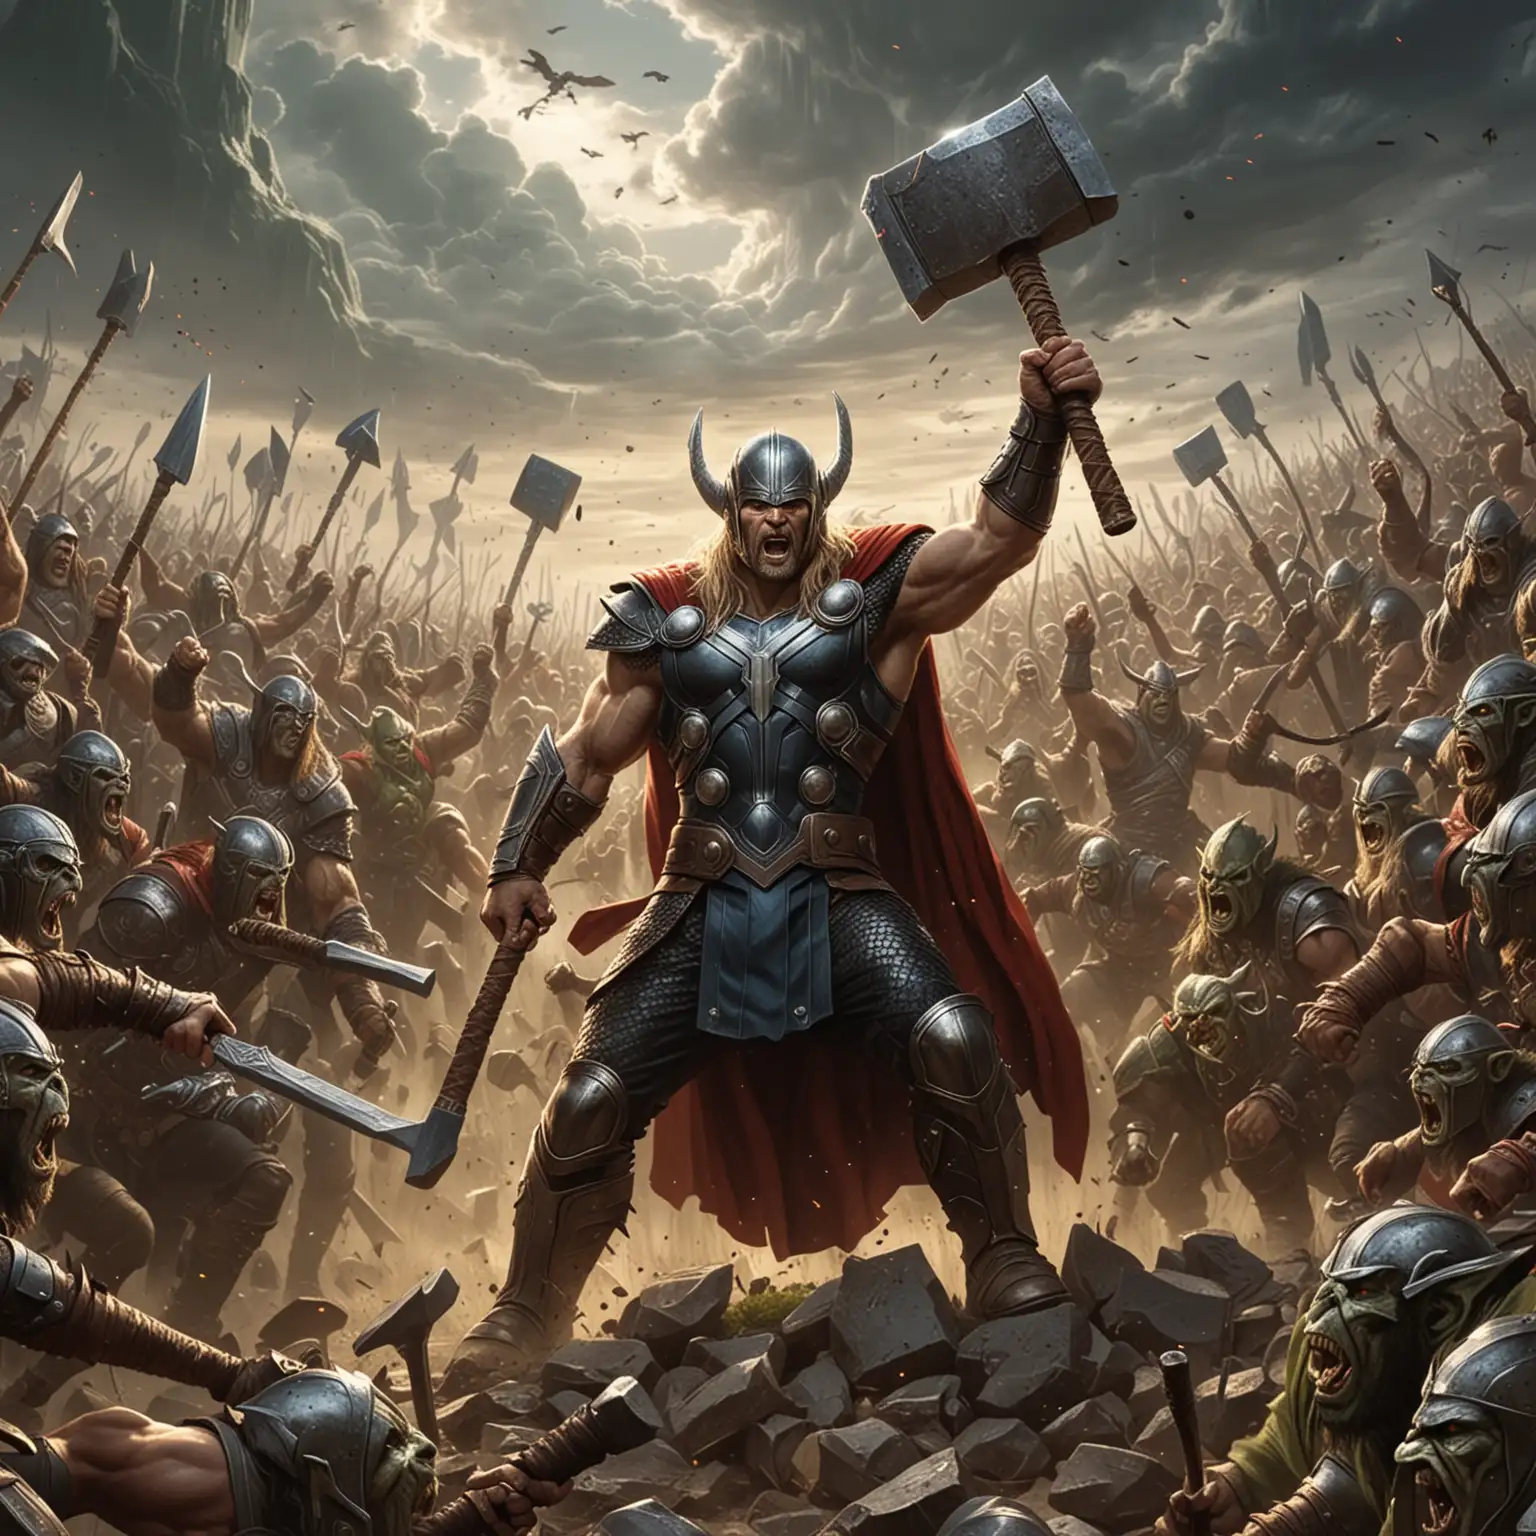 Thor fighting an army of orcs, dressed in armor, holding a hammer